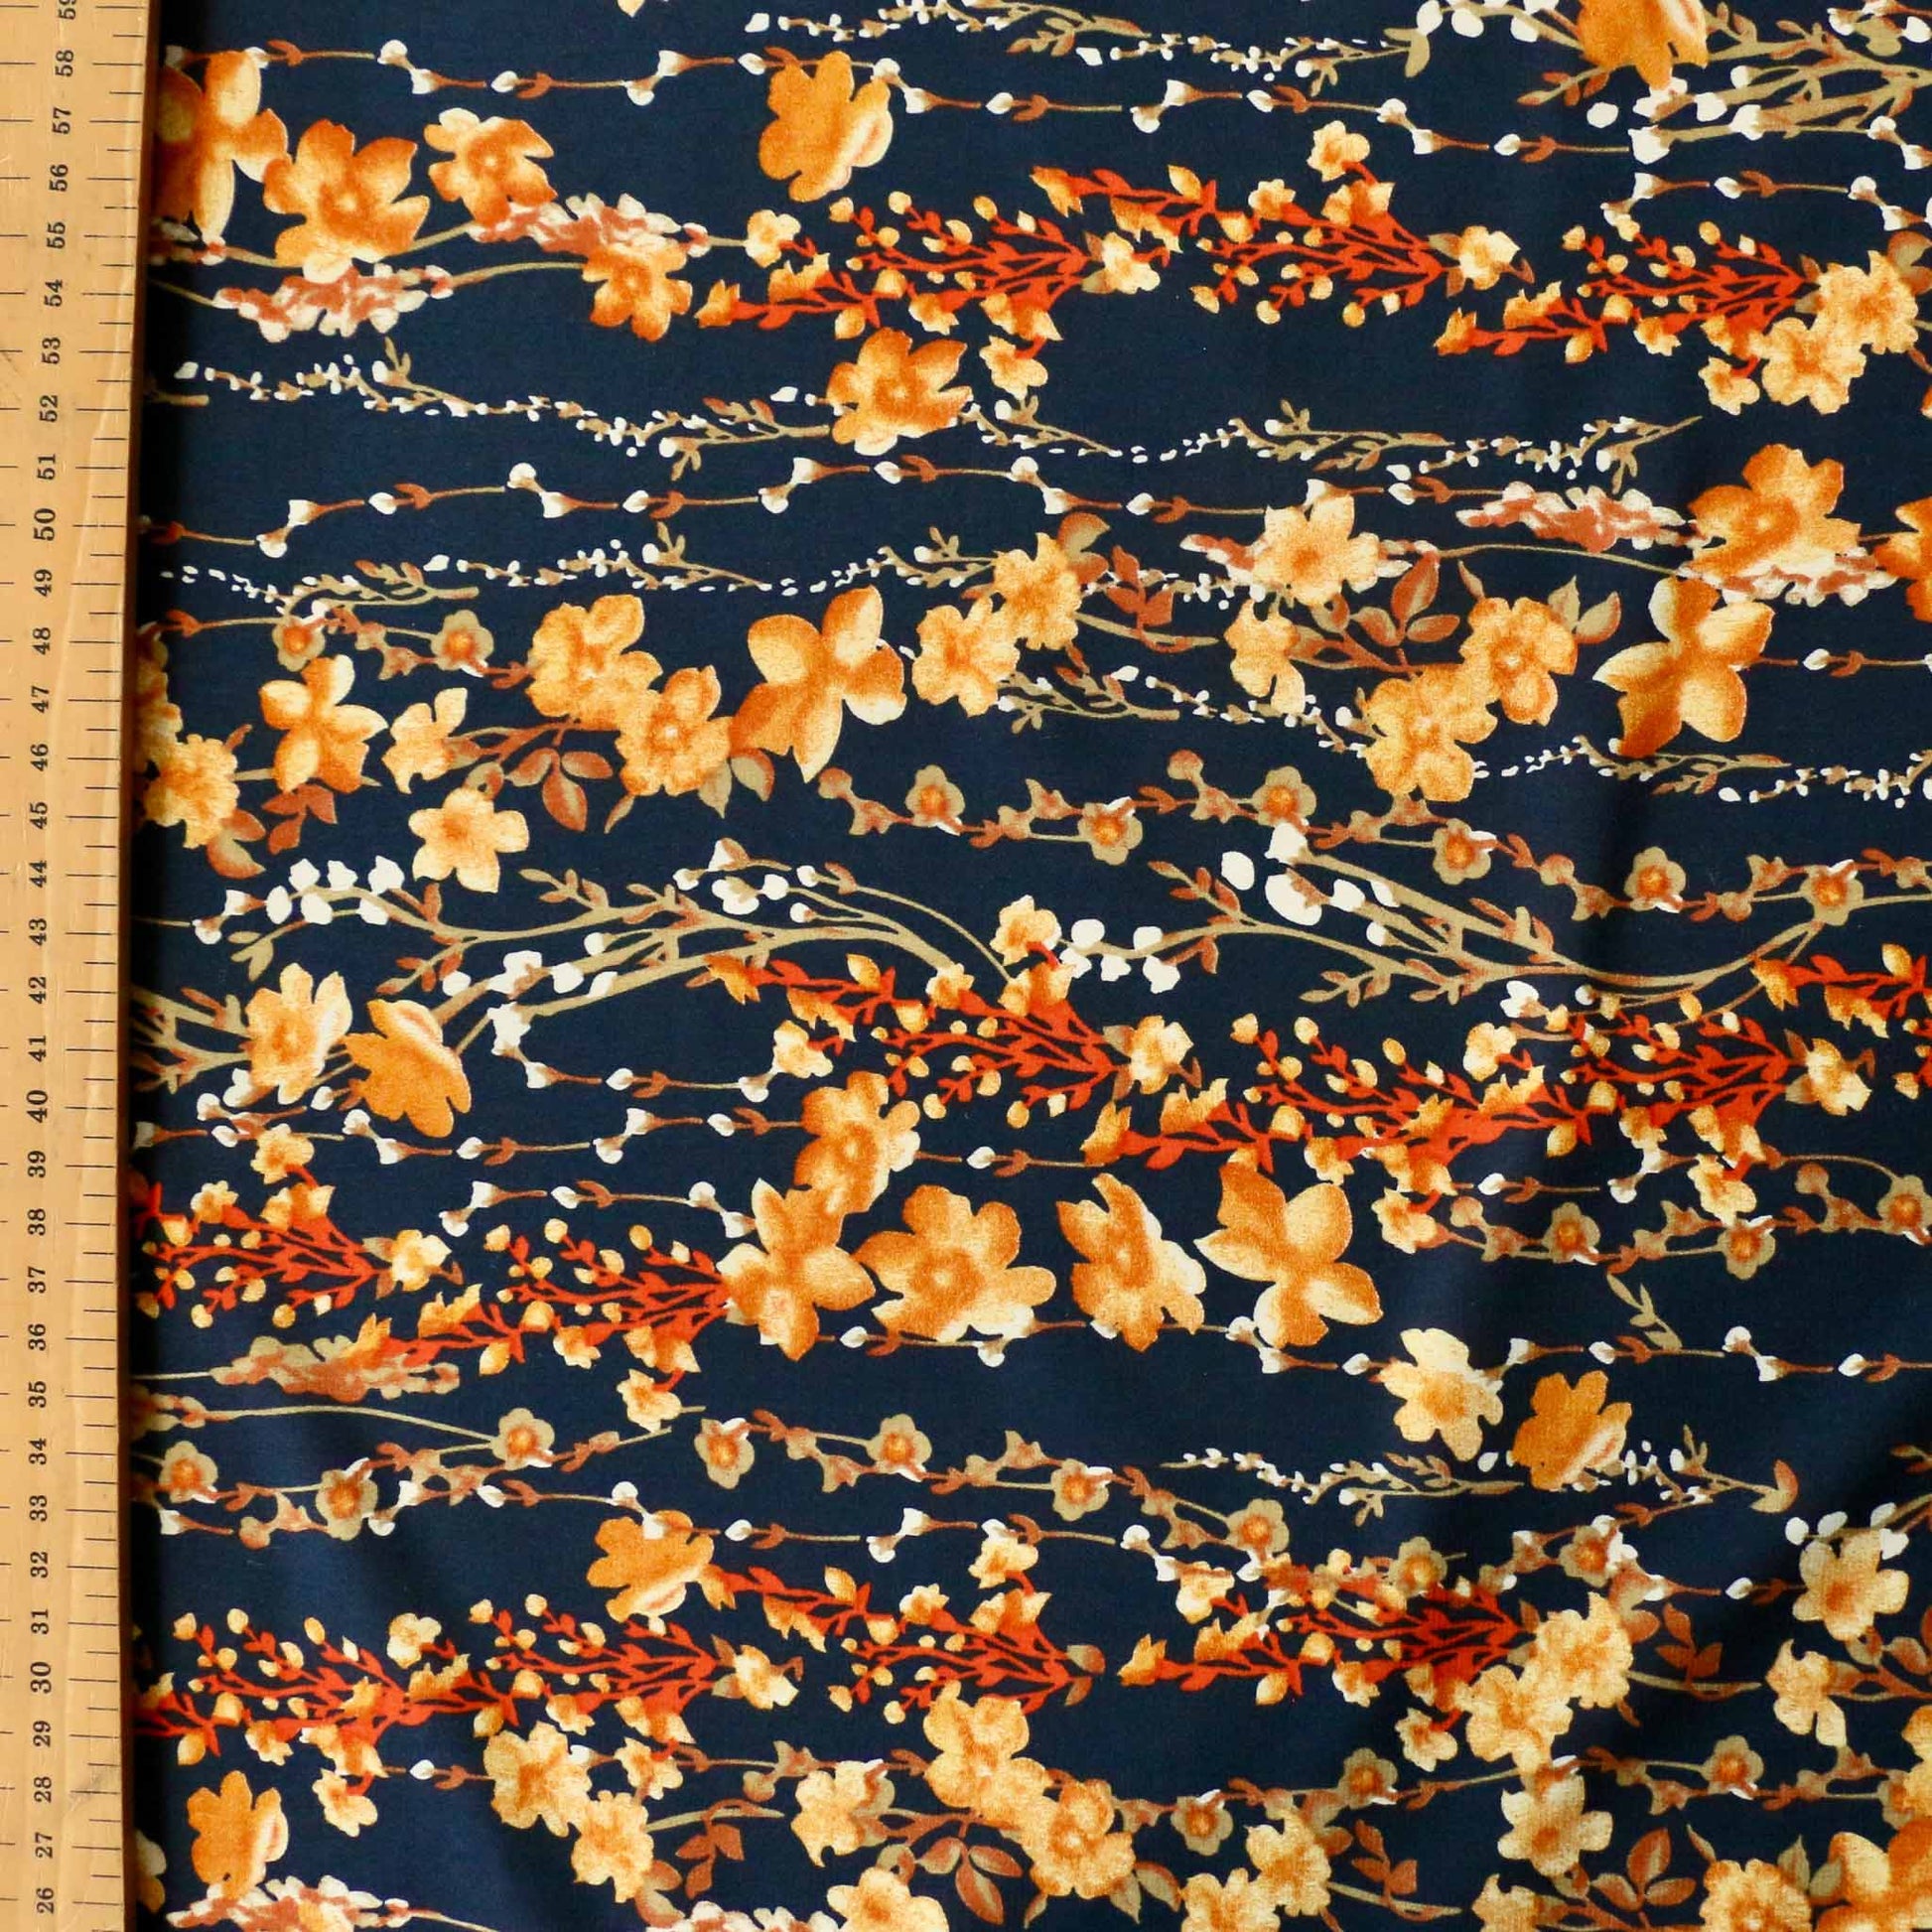 metre blue stretchy chiffon dressmaking fabric with golden yellow nature inspired floral print